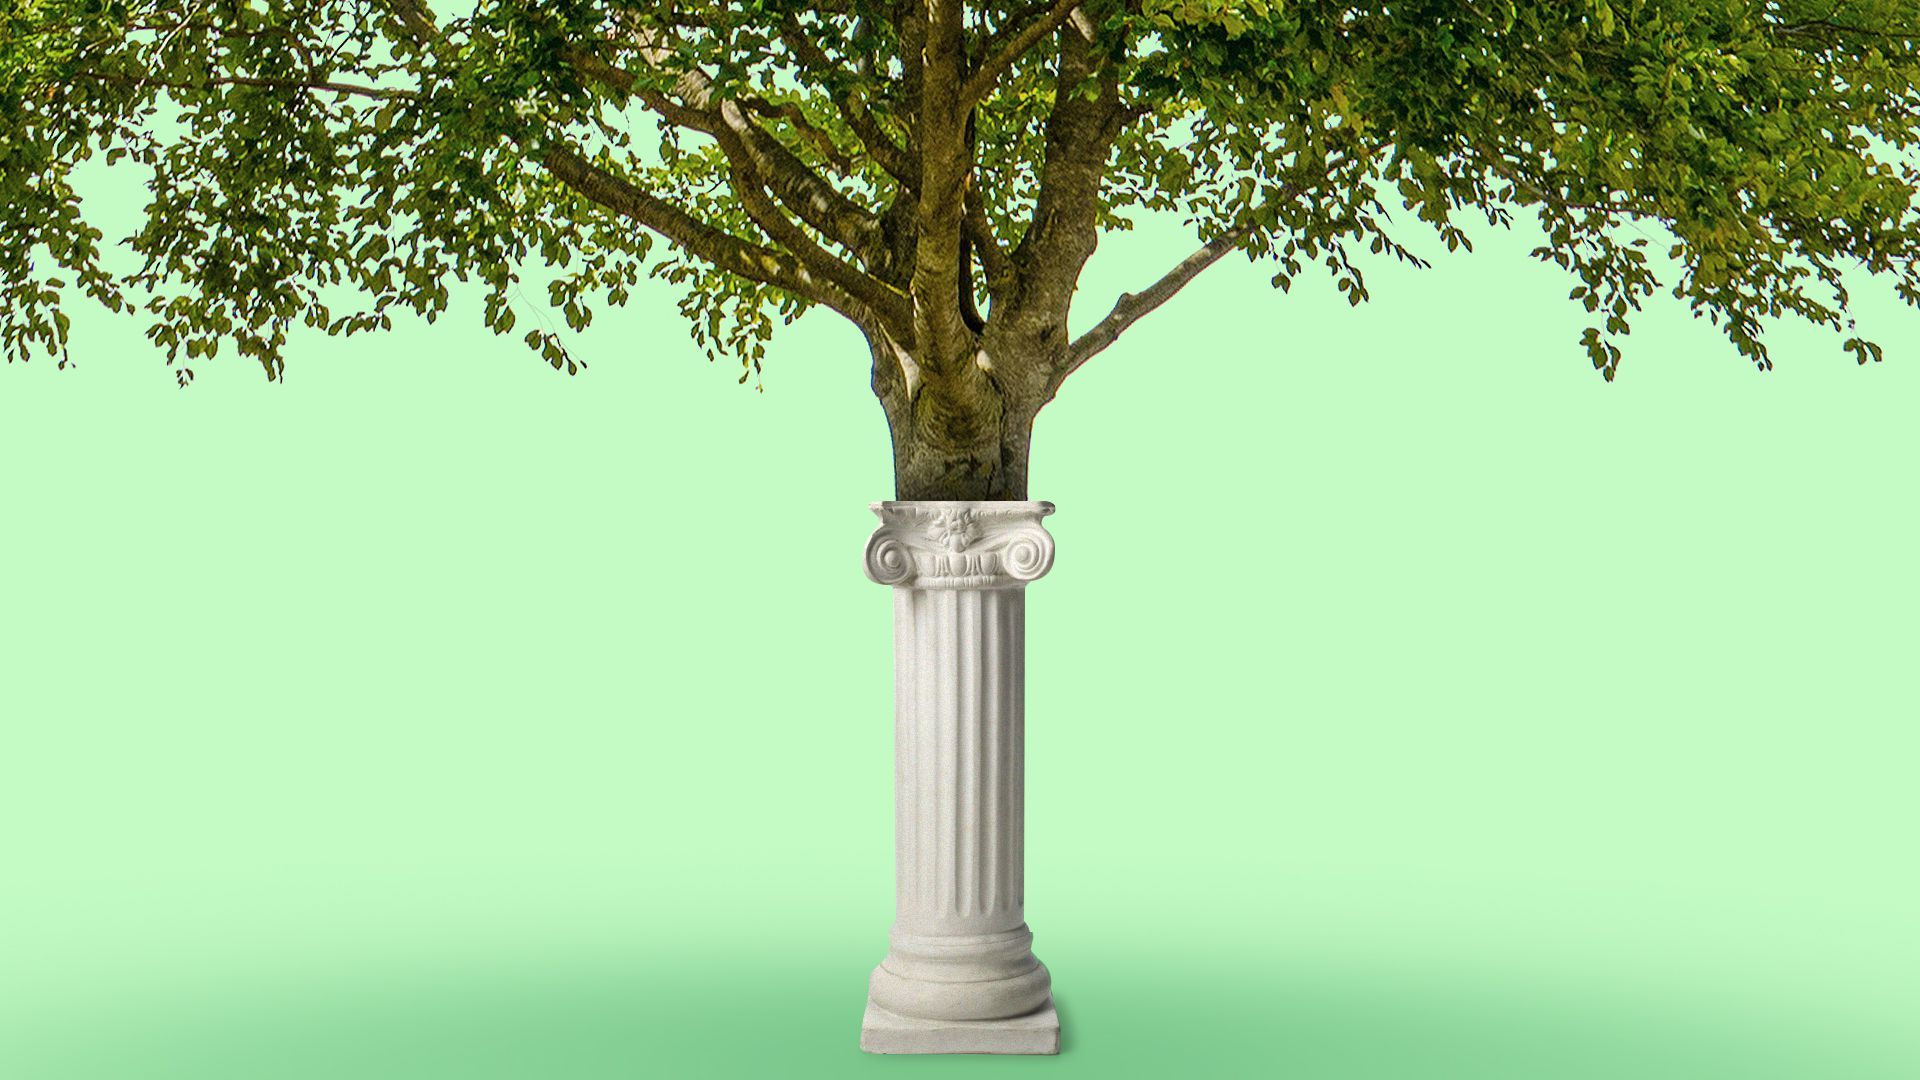 Illustration of a tree growing from a column